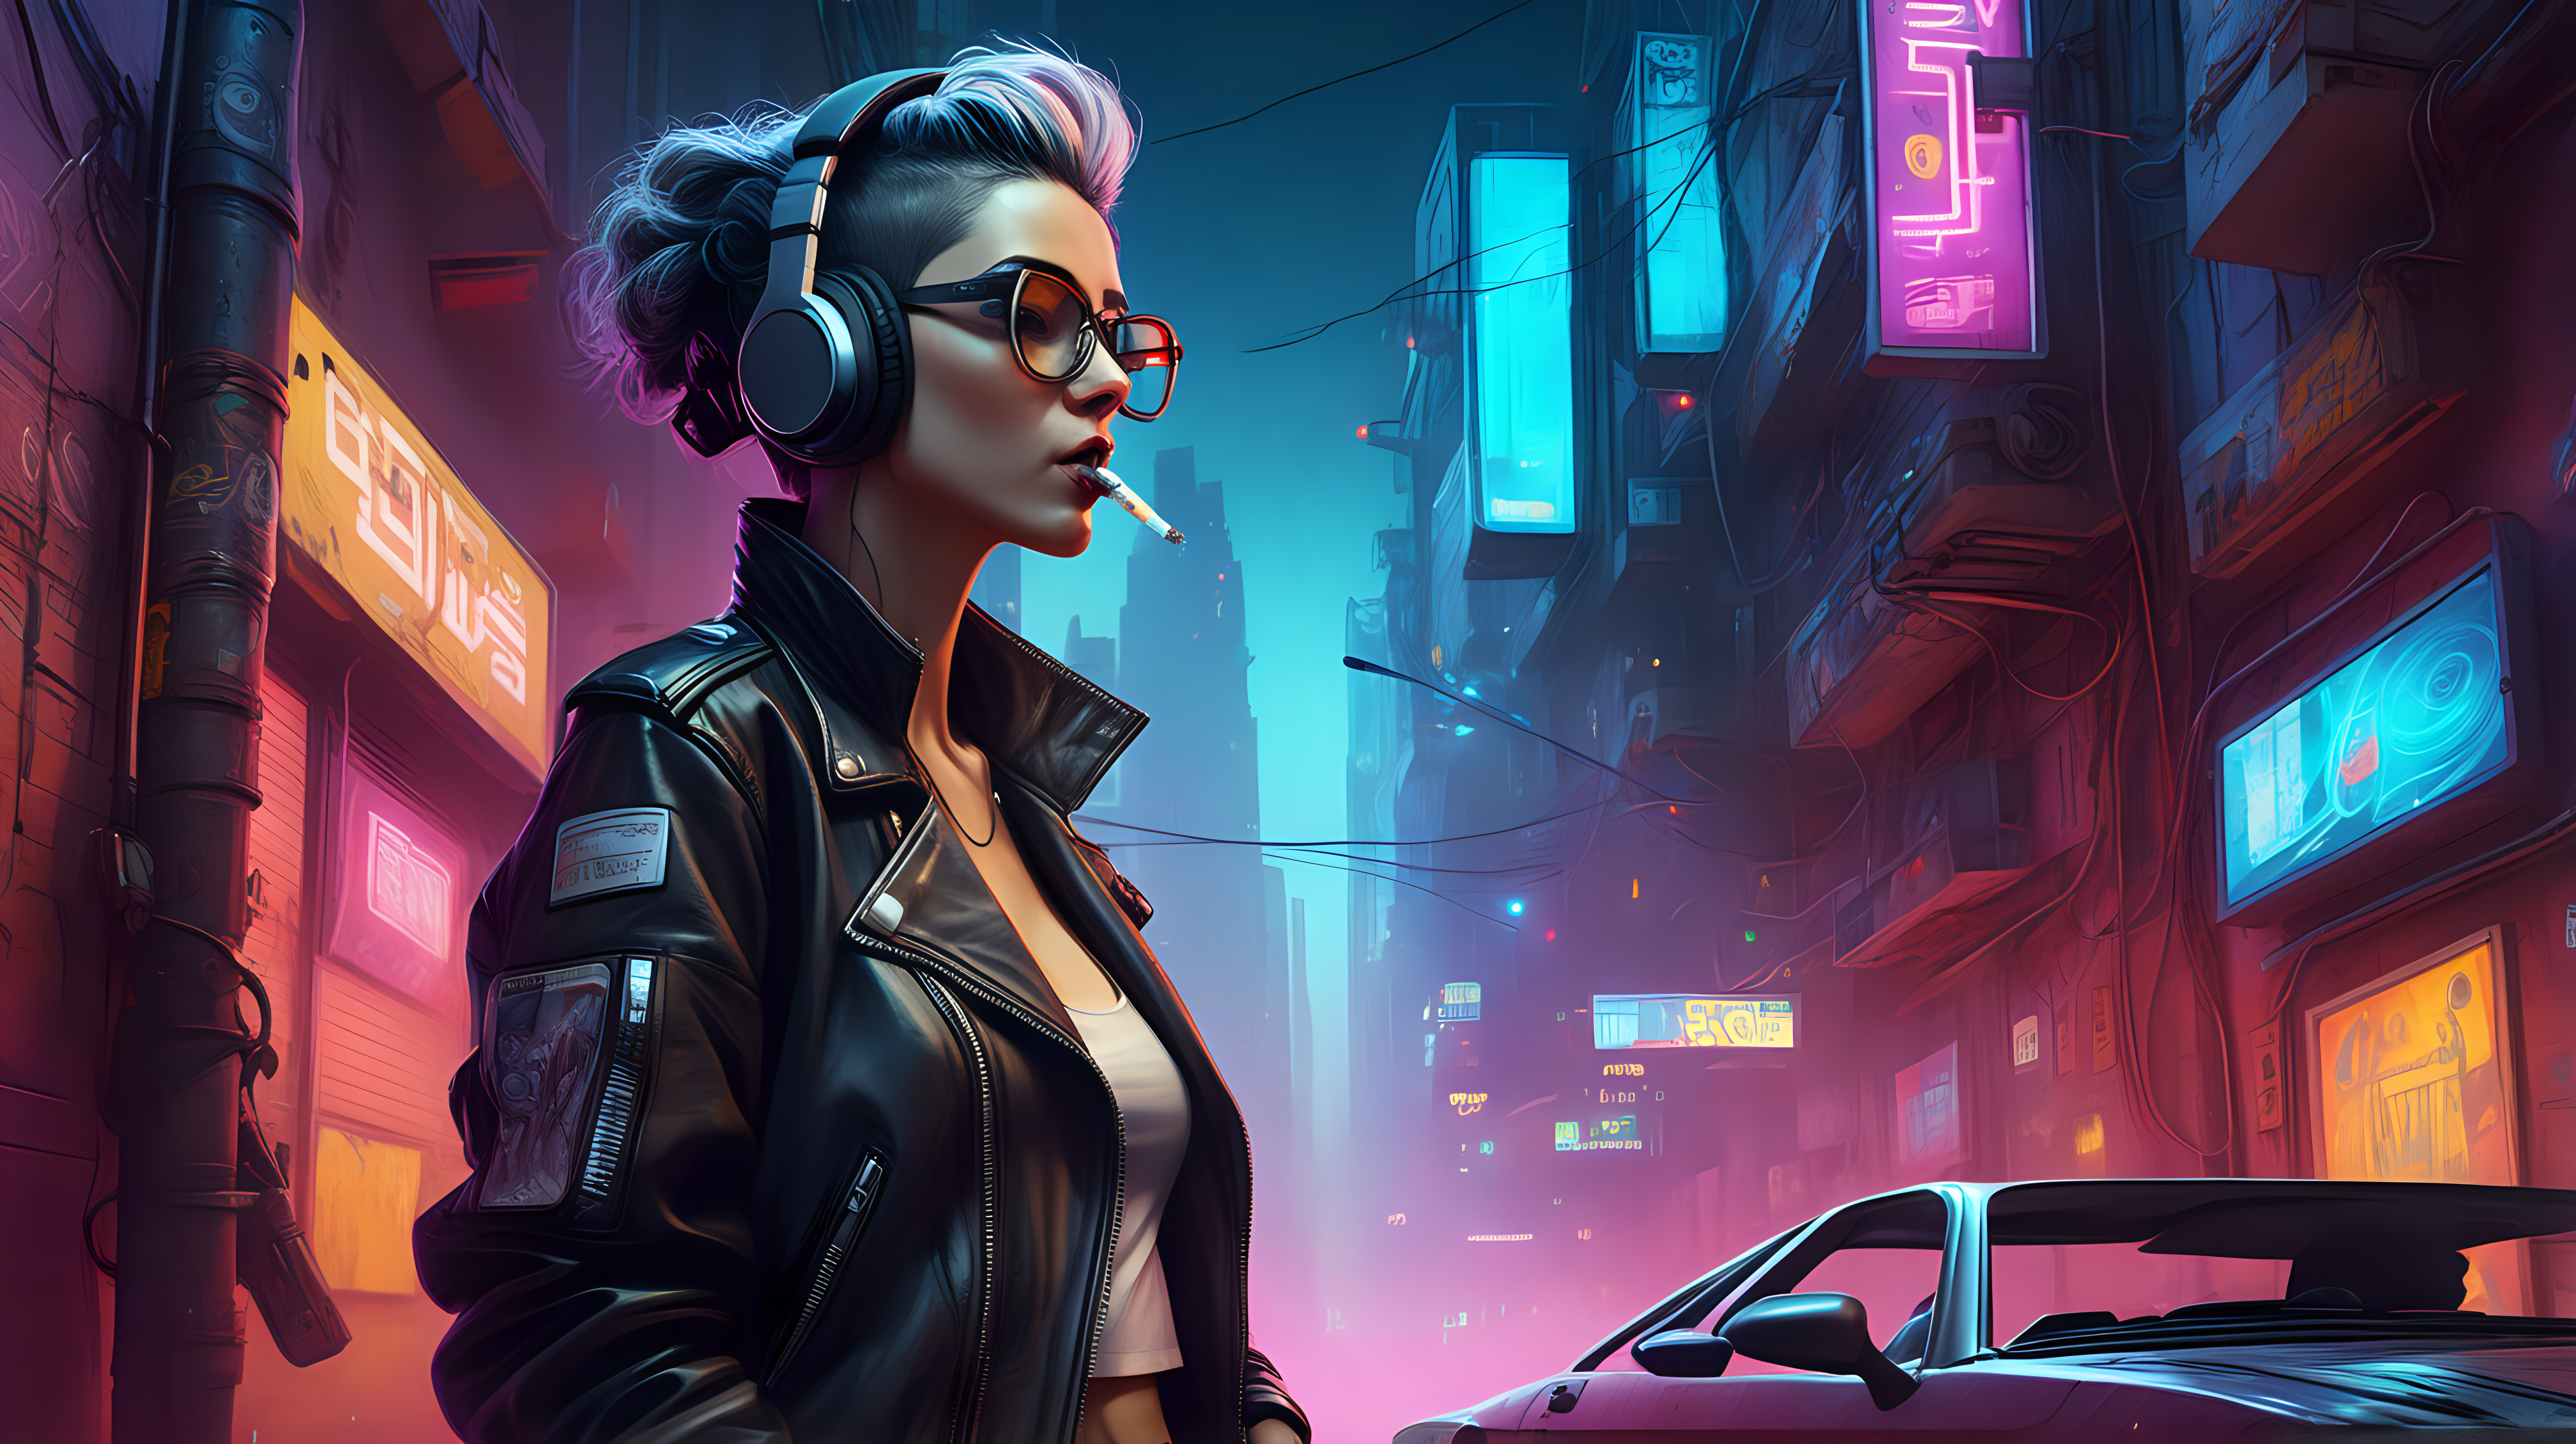 ilm stock full body portrait very detailed woman smoking a cigarette wearing a leather jacket headphones on her head glasses leaning against a wall in a cyberpunk city very detailed flying car passing in colored background at night.